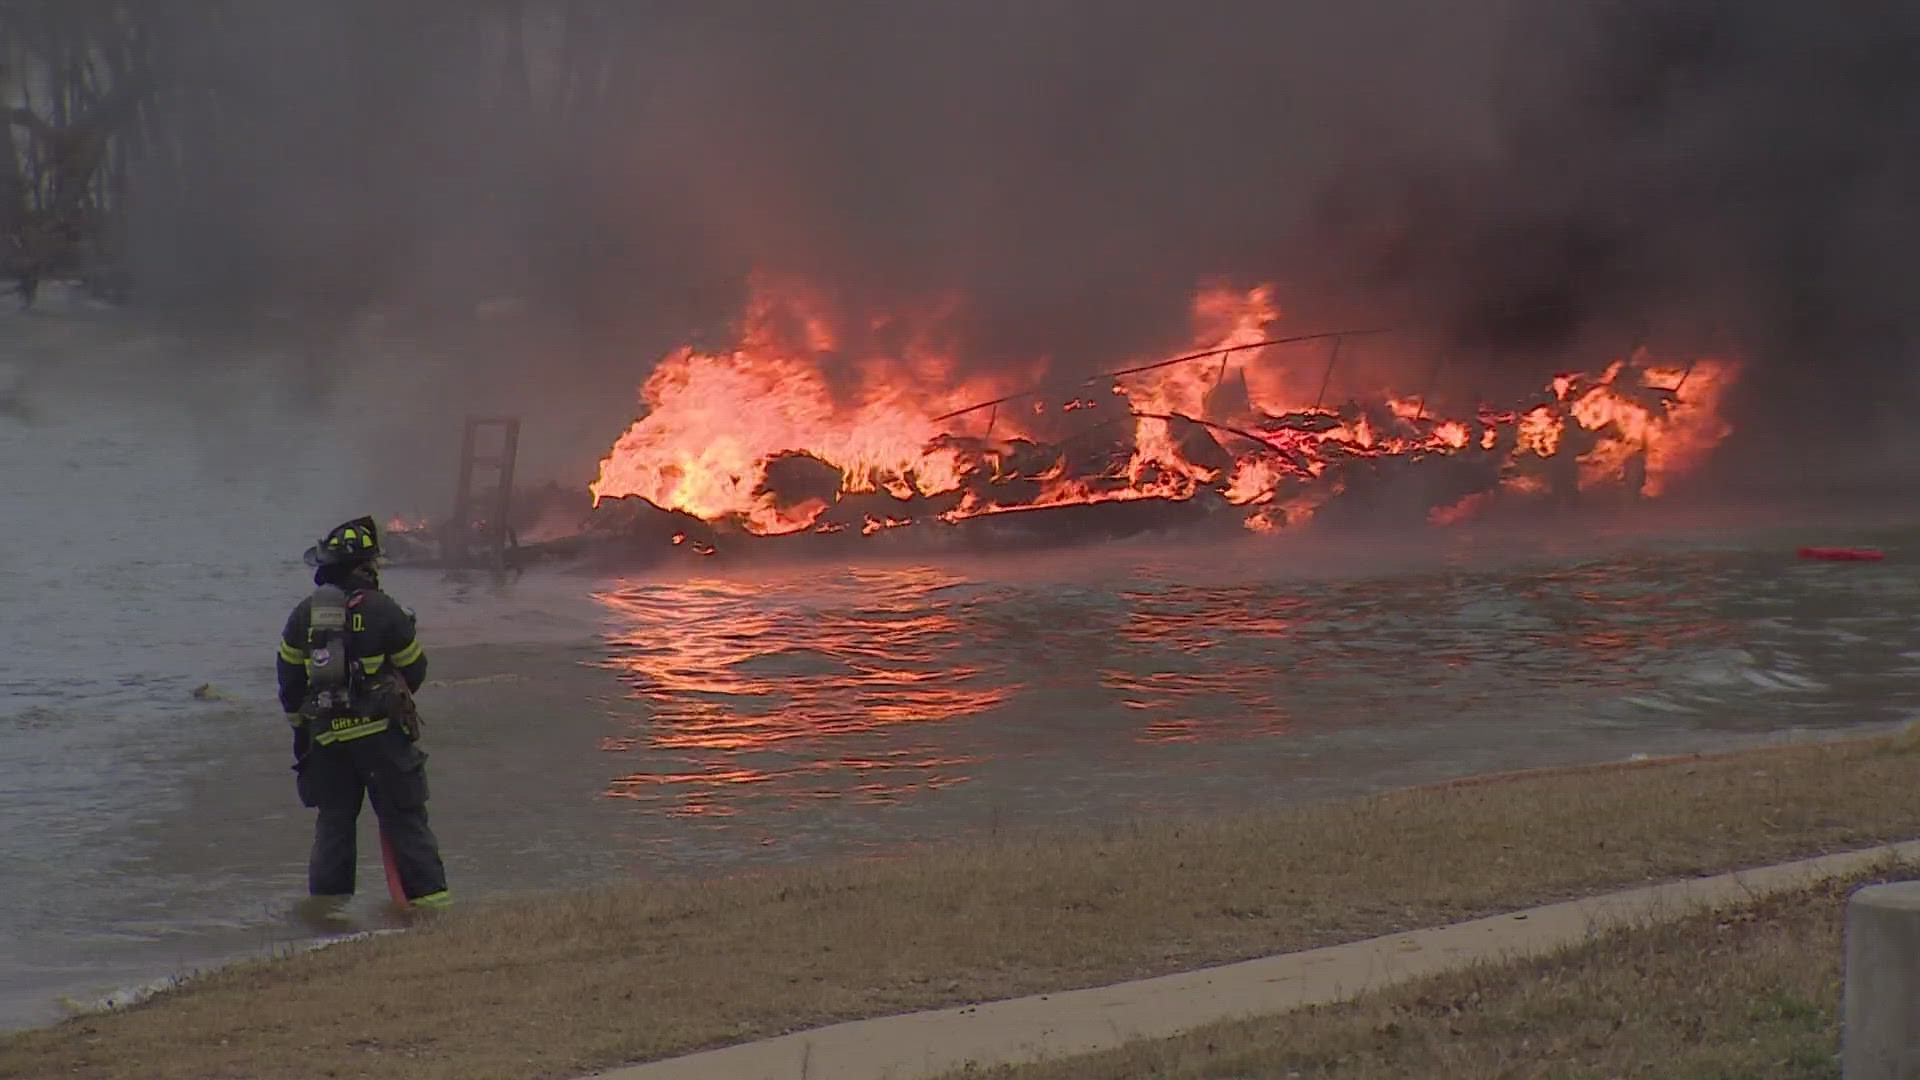 One boat caught fire at the Lake Dallas marina, which caught another boat, resulting in a total loss of both boats.